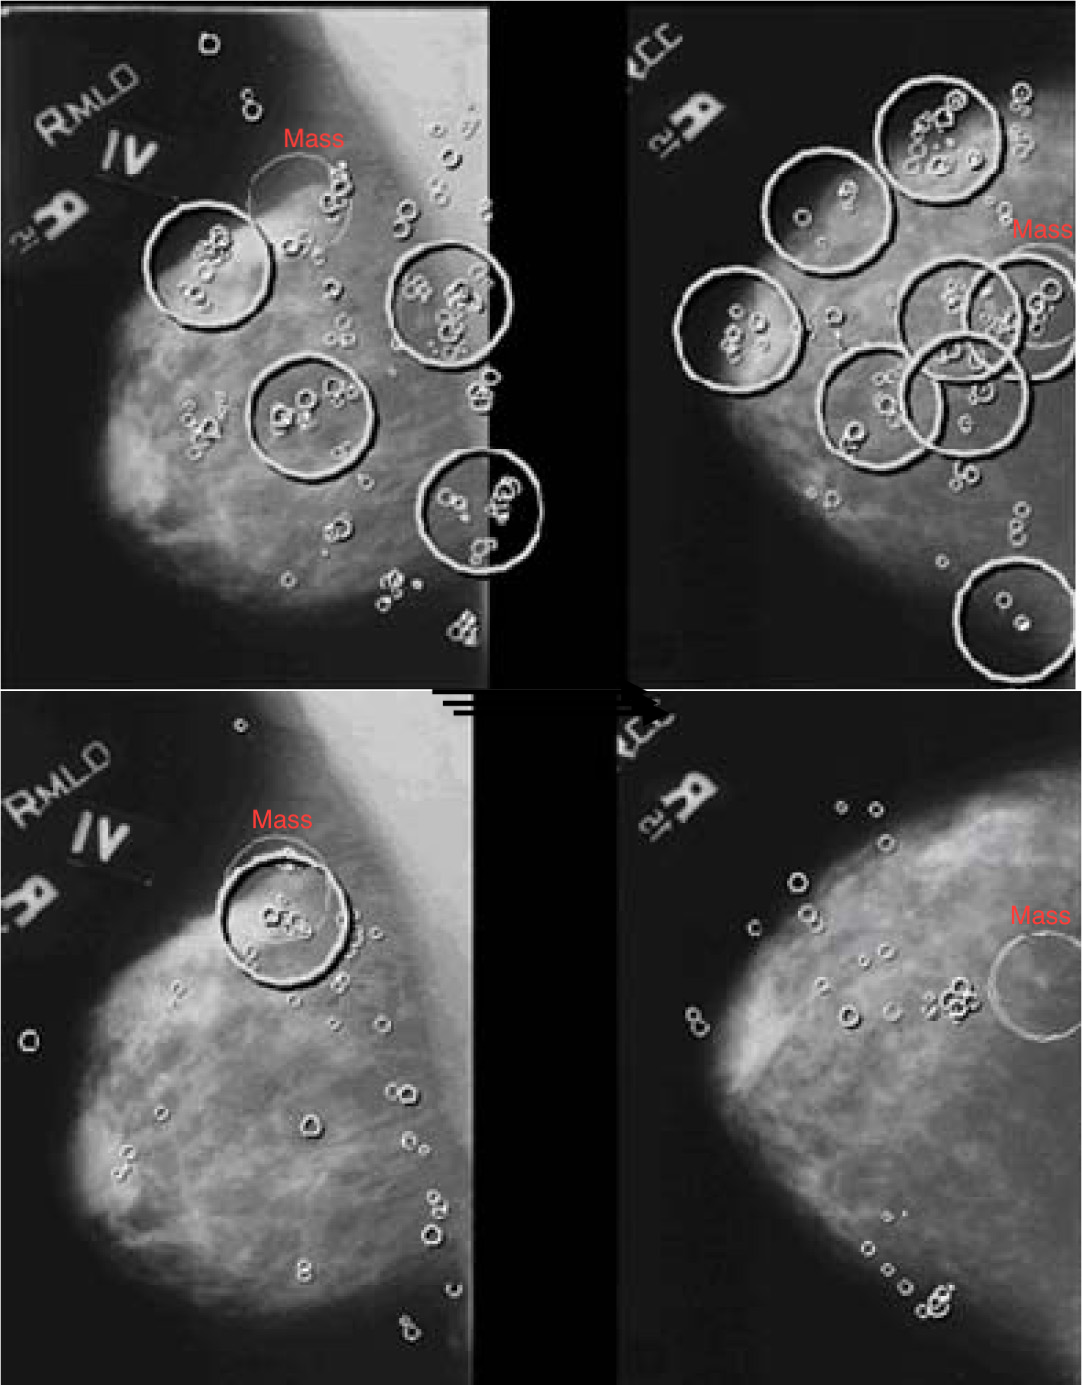 Eye-tracking recordings for a two-view digital mammogram. The top row is an inexperienced observer while the bottom row is an expert radiologist. The left column shows MLO views while the right column shows CC views.